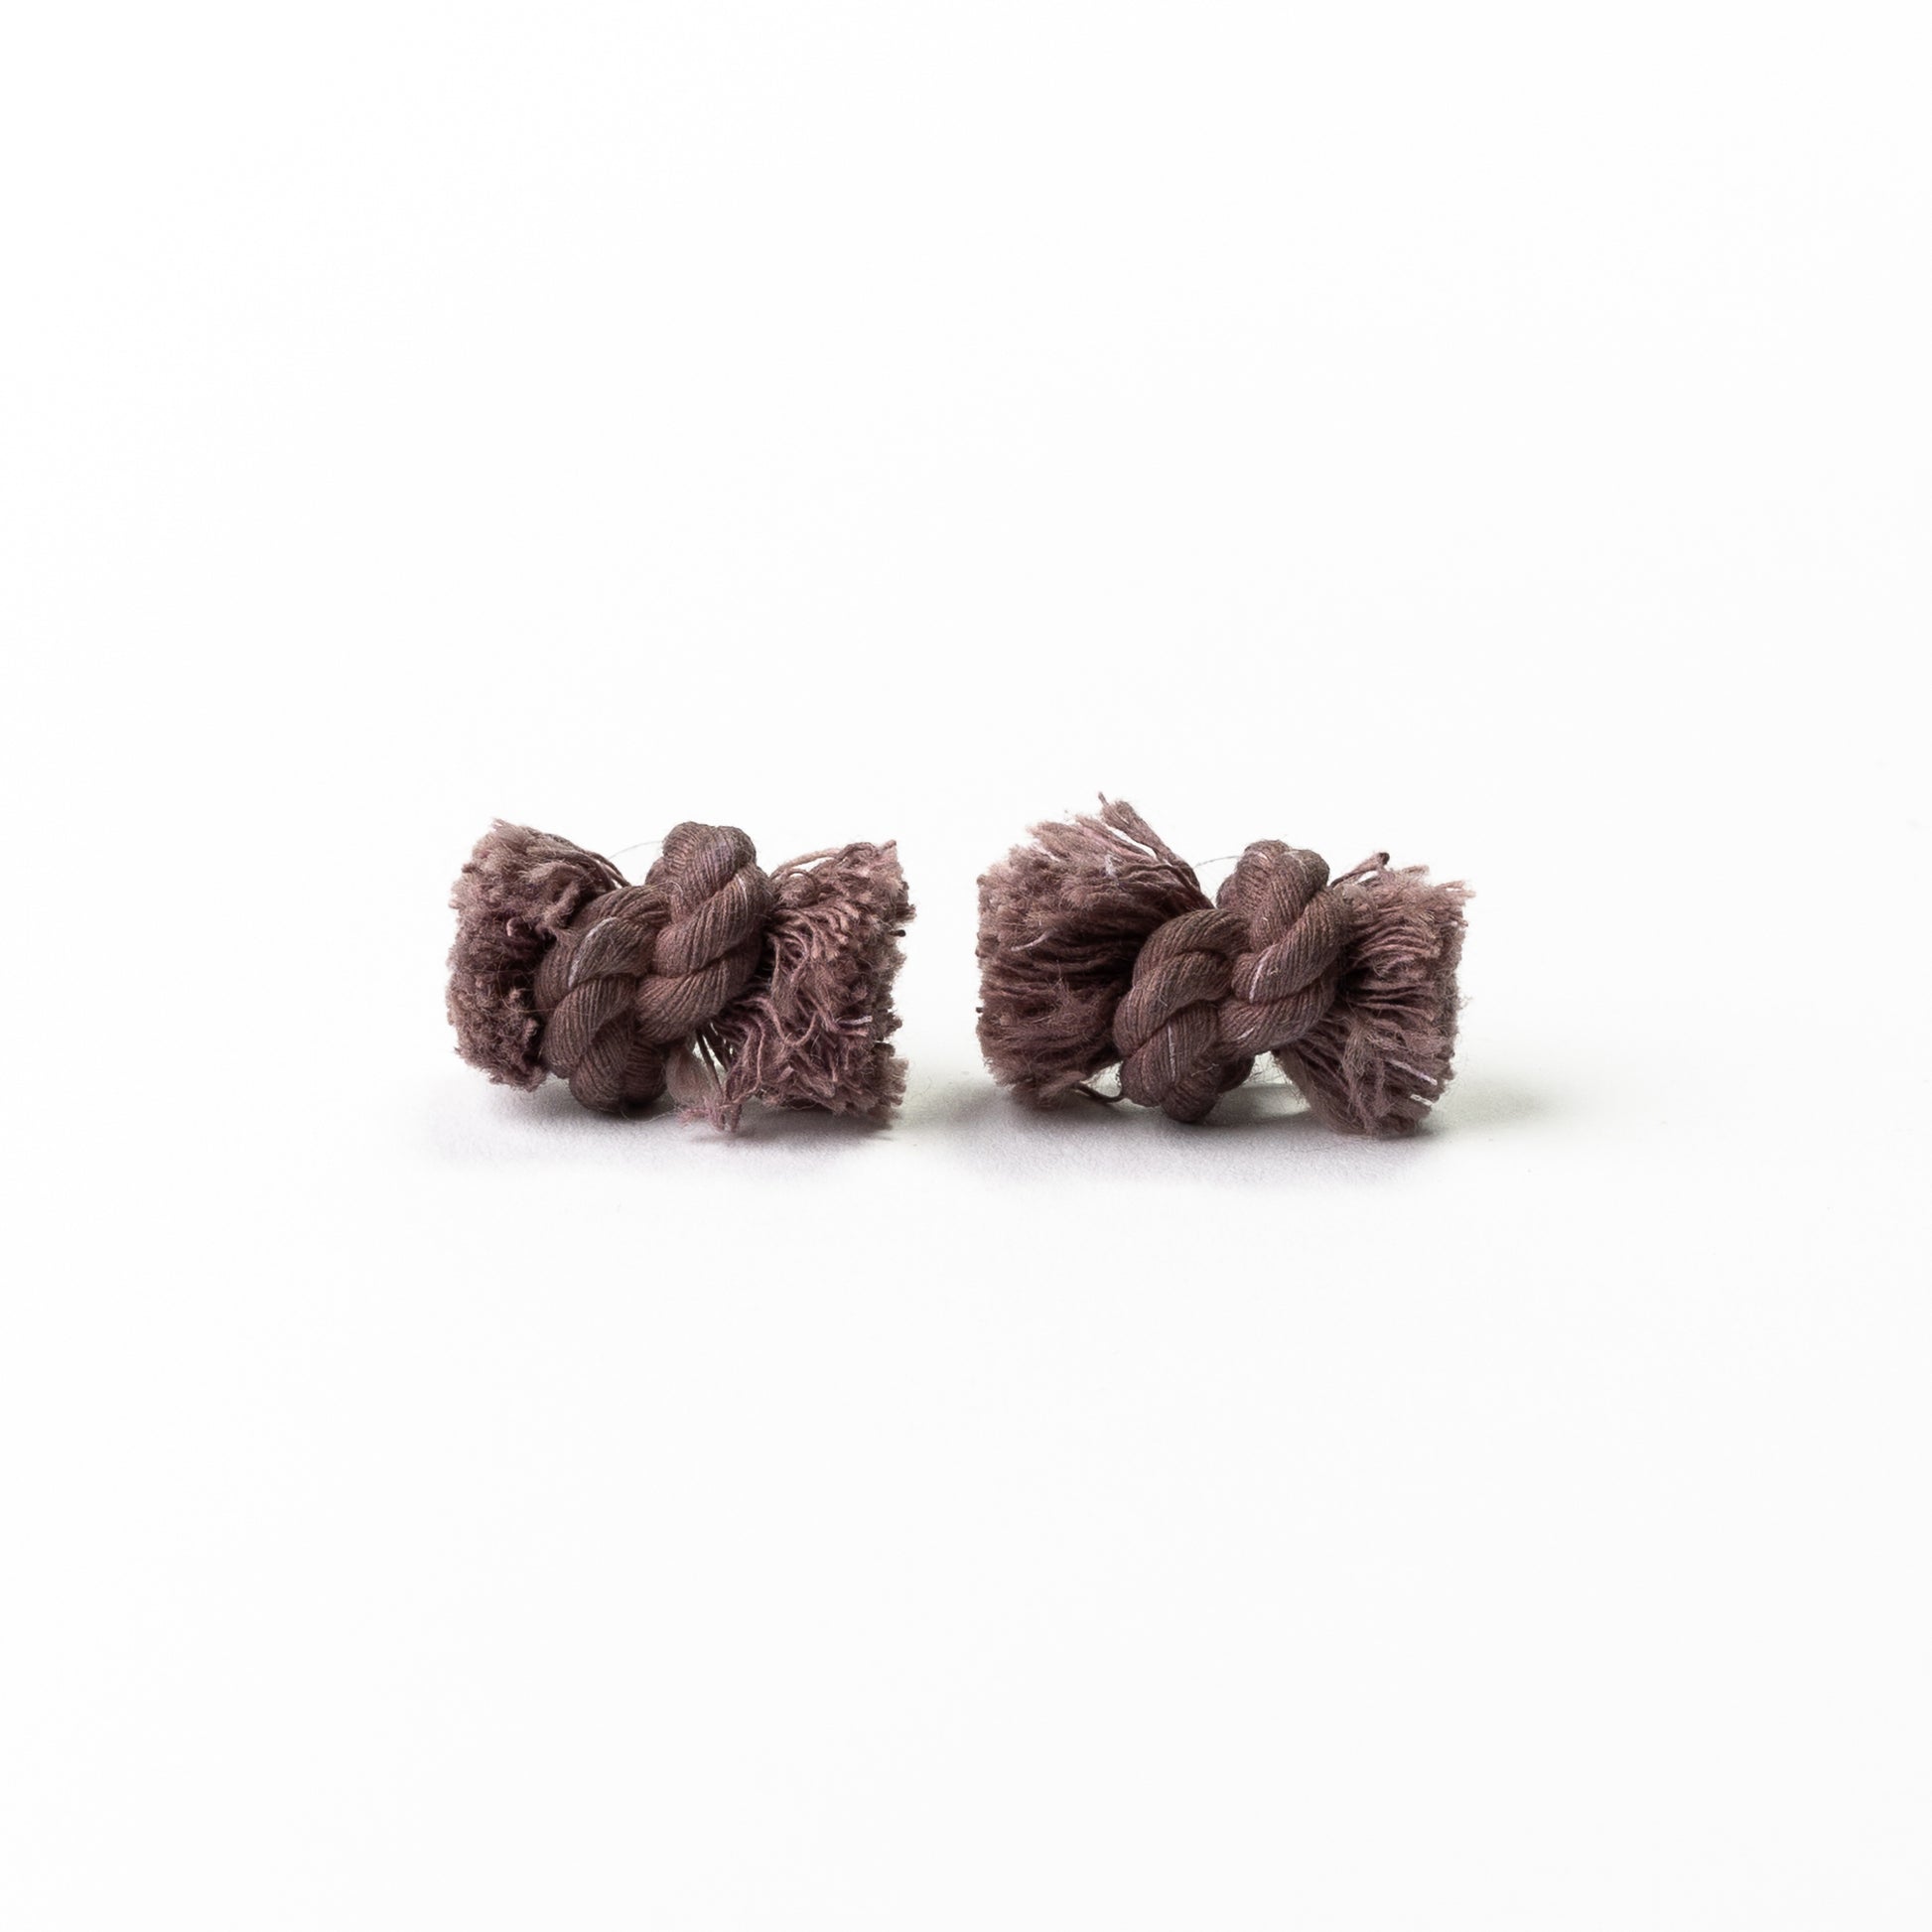 Dyed cotton rope knot earrings with titanium post in mauve.